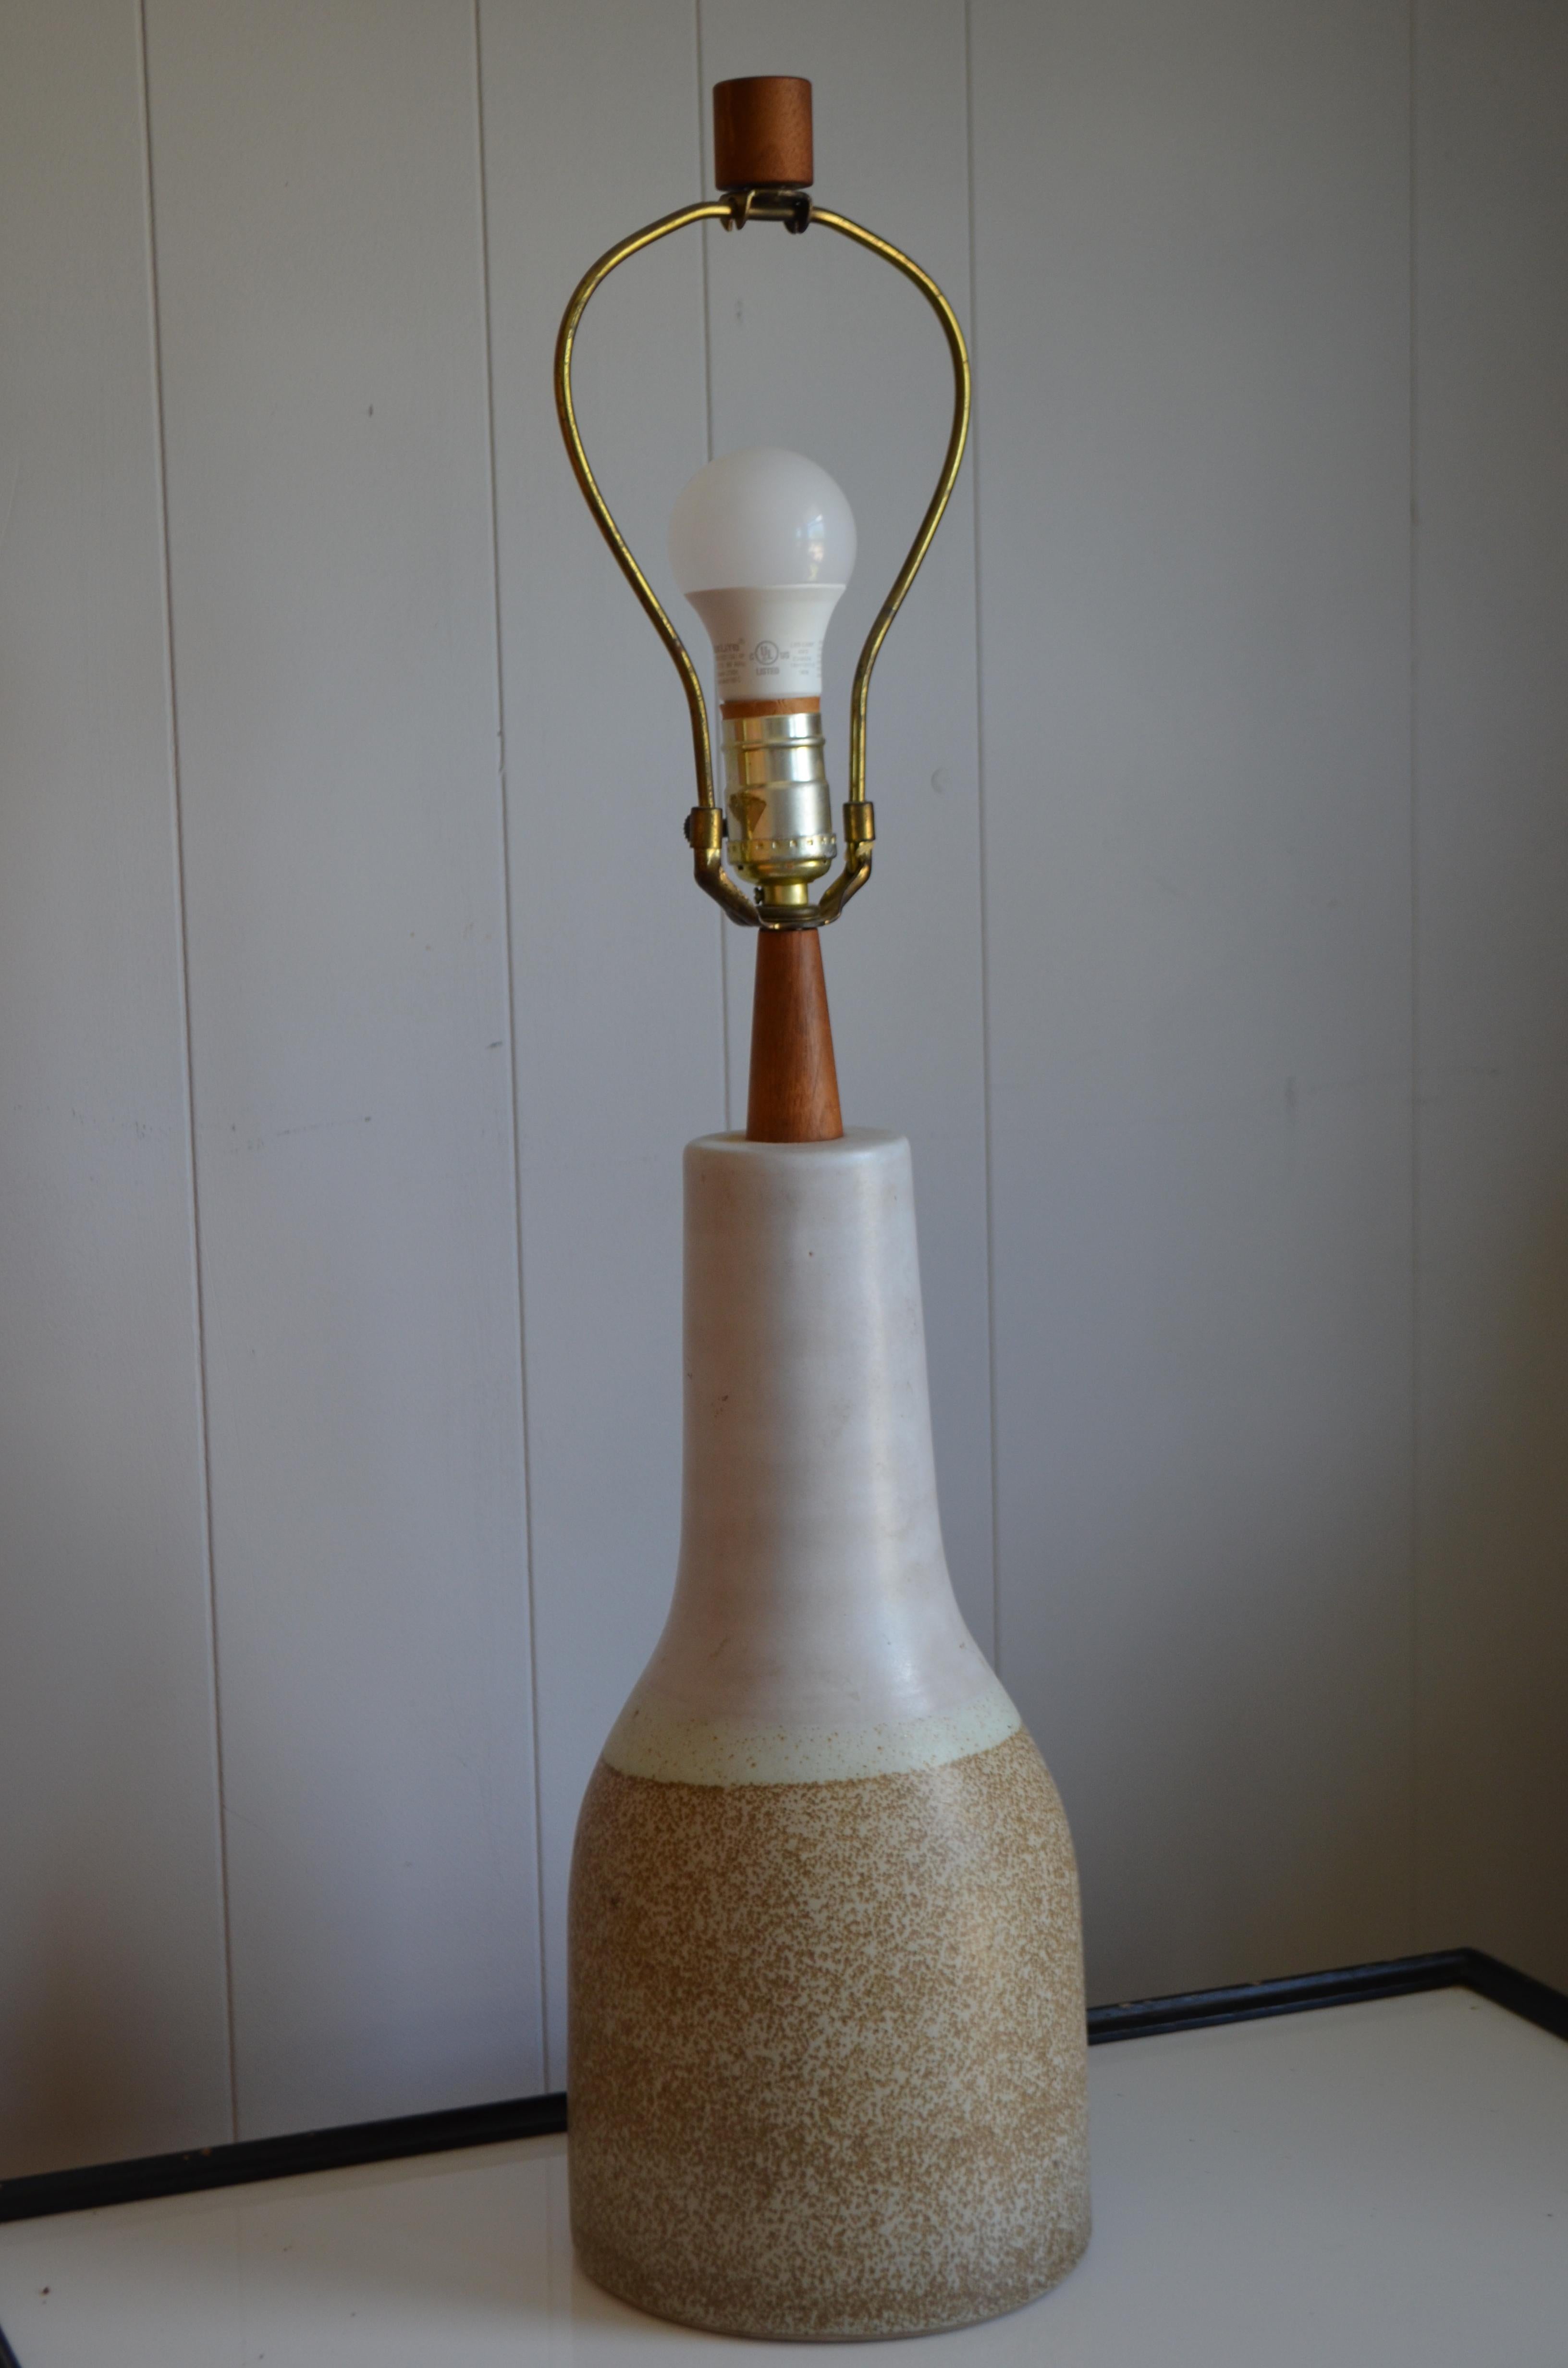 Martz ceramic table lamp, midcentury, has walnut height extender and finial with heart-shaped brass harp. Elegantly sculptural in form with a visibly tactile combination of glazes and wooden components. Lamp shade not included.